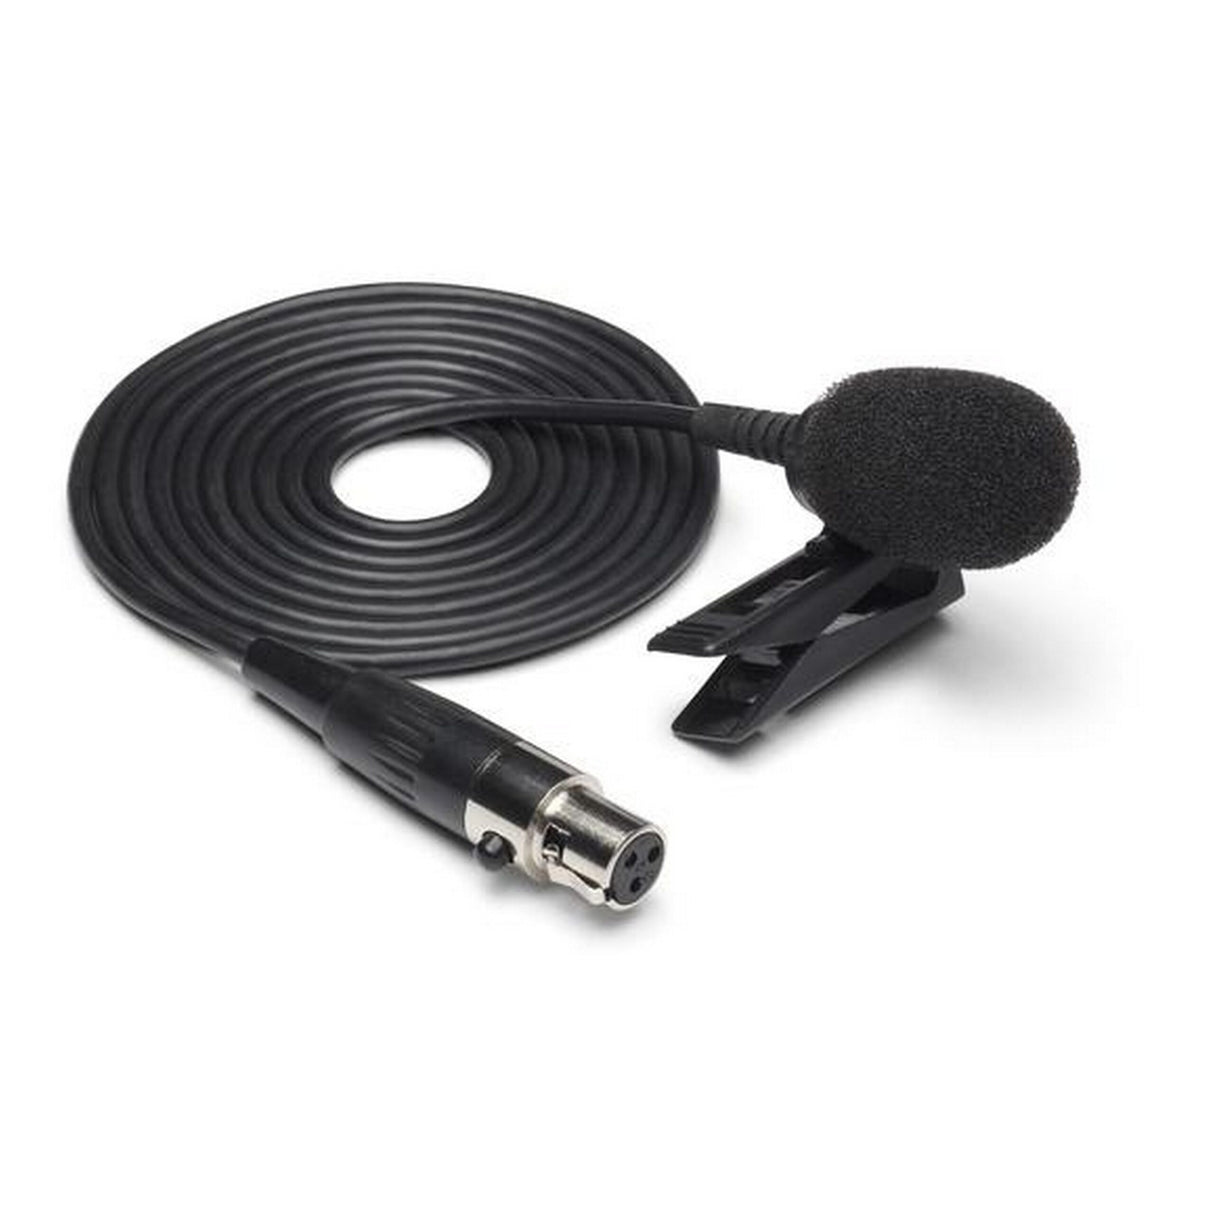 Samson LM8 Lavalier Microphone for Go Mic Mobile, Concert 88, XPD2 and AirLine ATX Wireless Systems